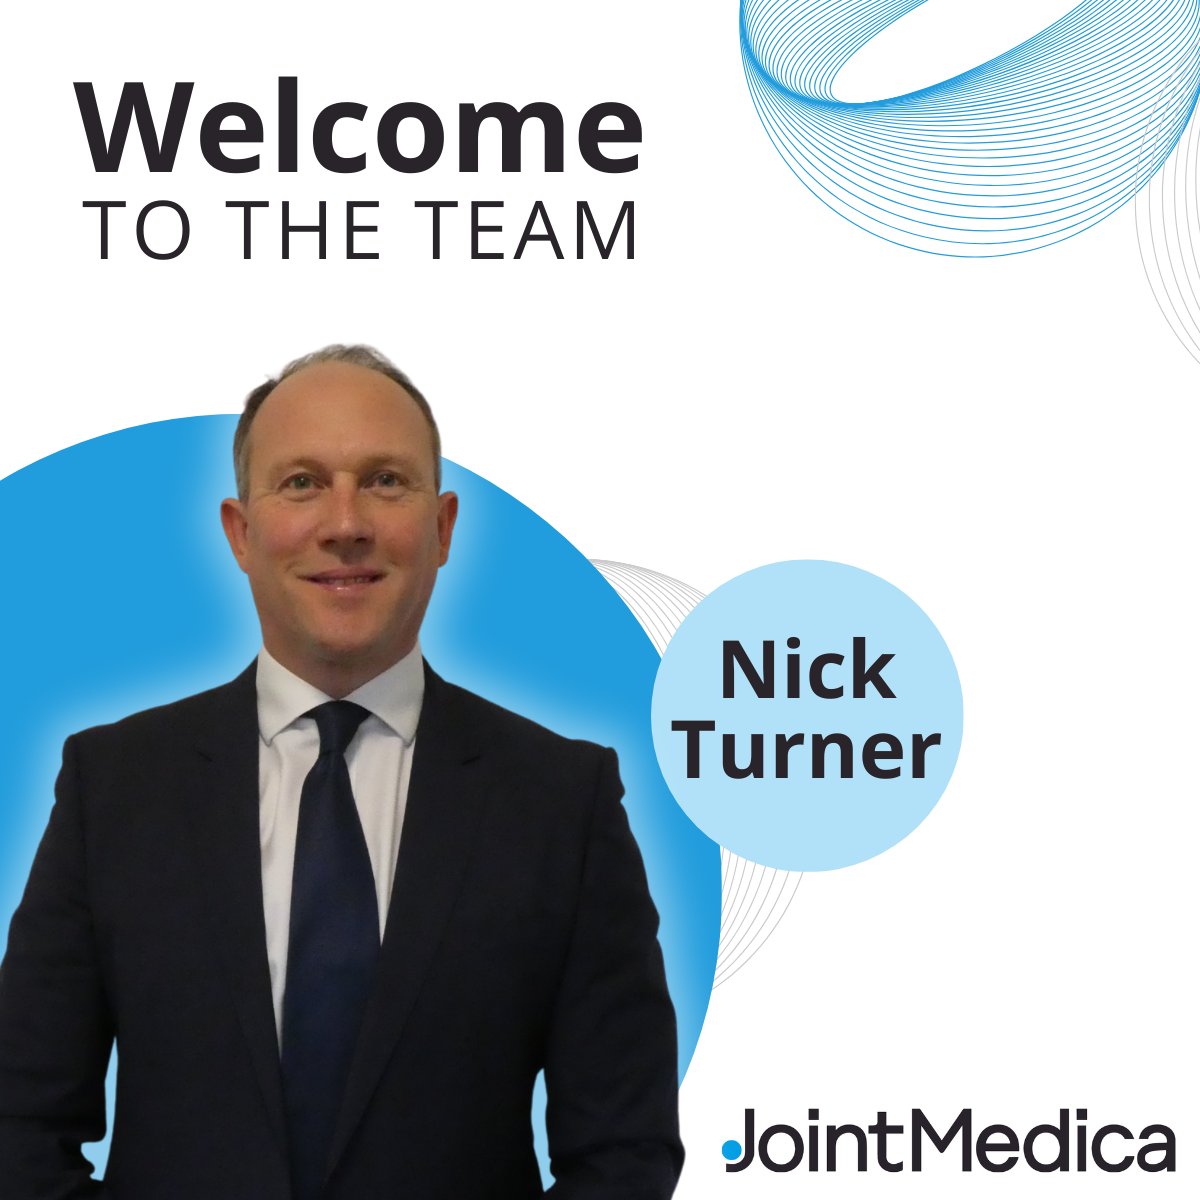 We are extremely pleased to announce the recent appointment of Nick Turner to the JointMedica team as Senior Director – Design and Development! Nick brings with him twenty-three years of experience of design & development within the medical technology industry. Prior to